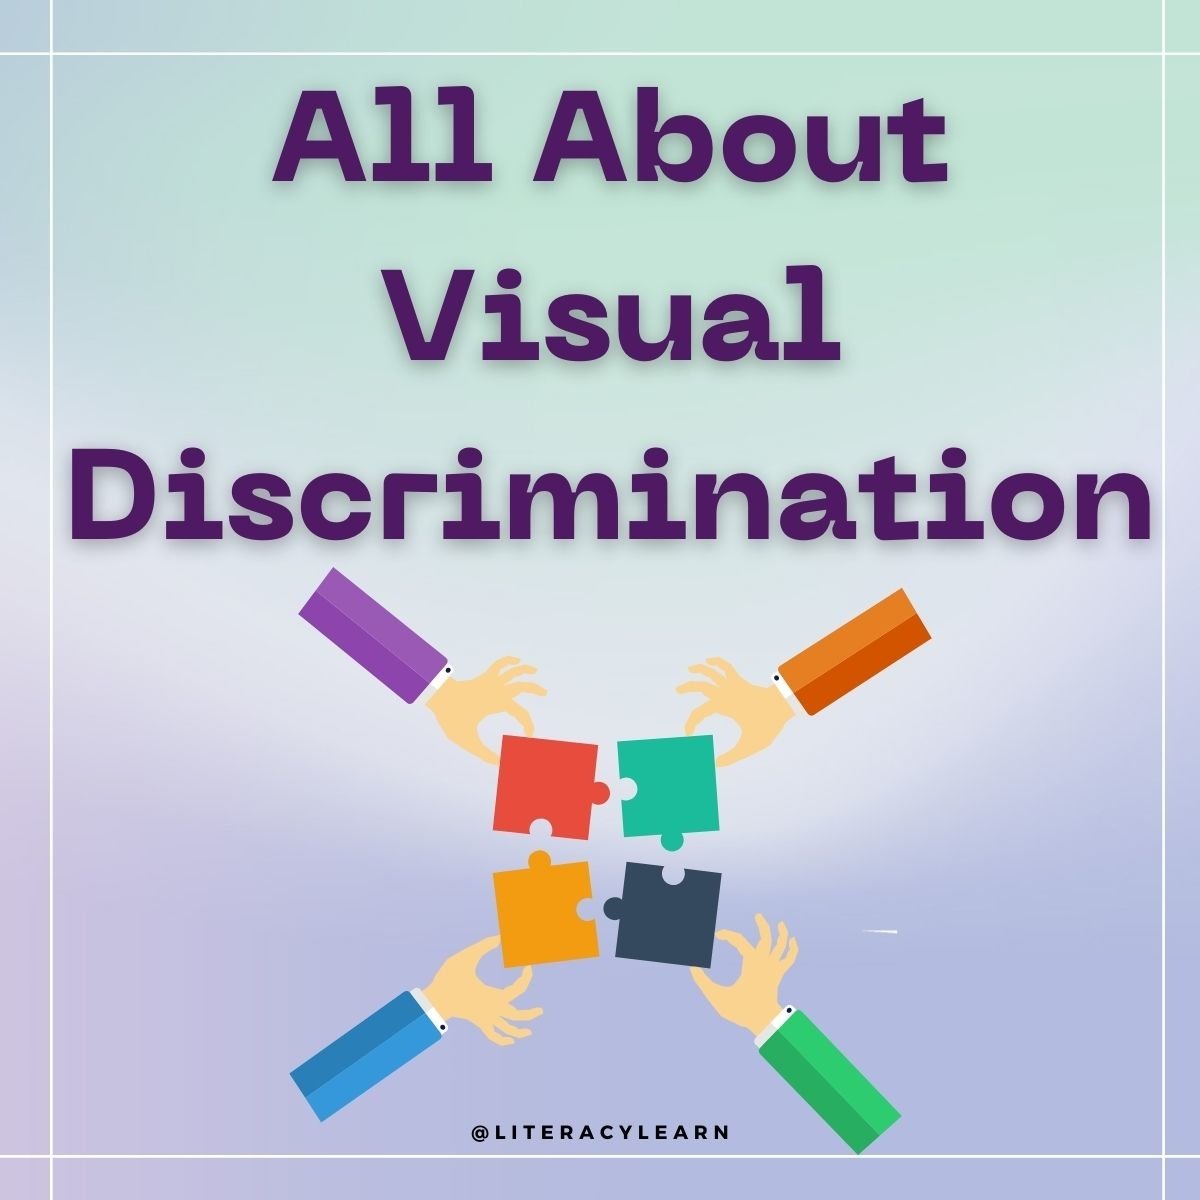 Featured image with purple text "All About Visual Discrimination" and graphic of a puzzle